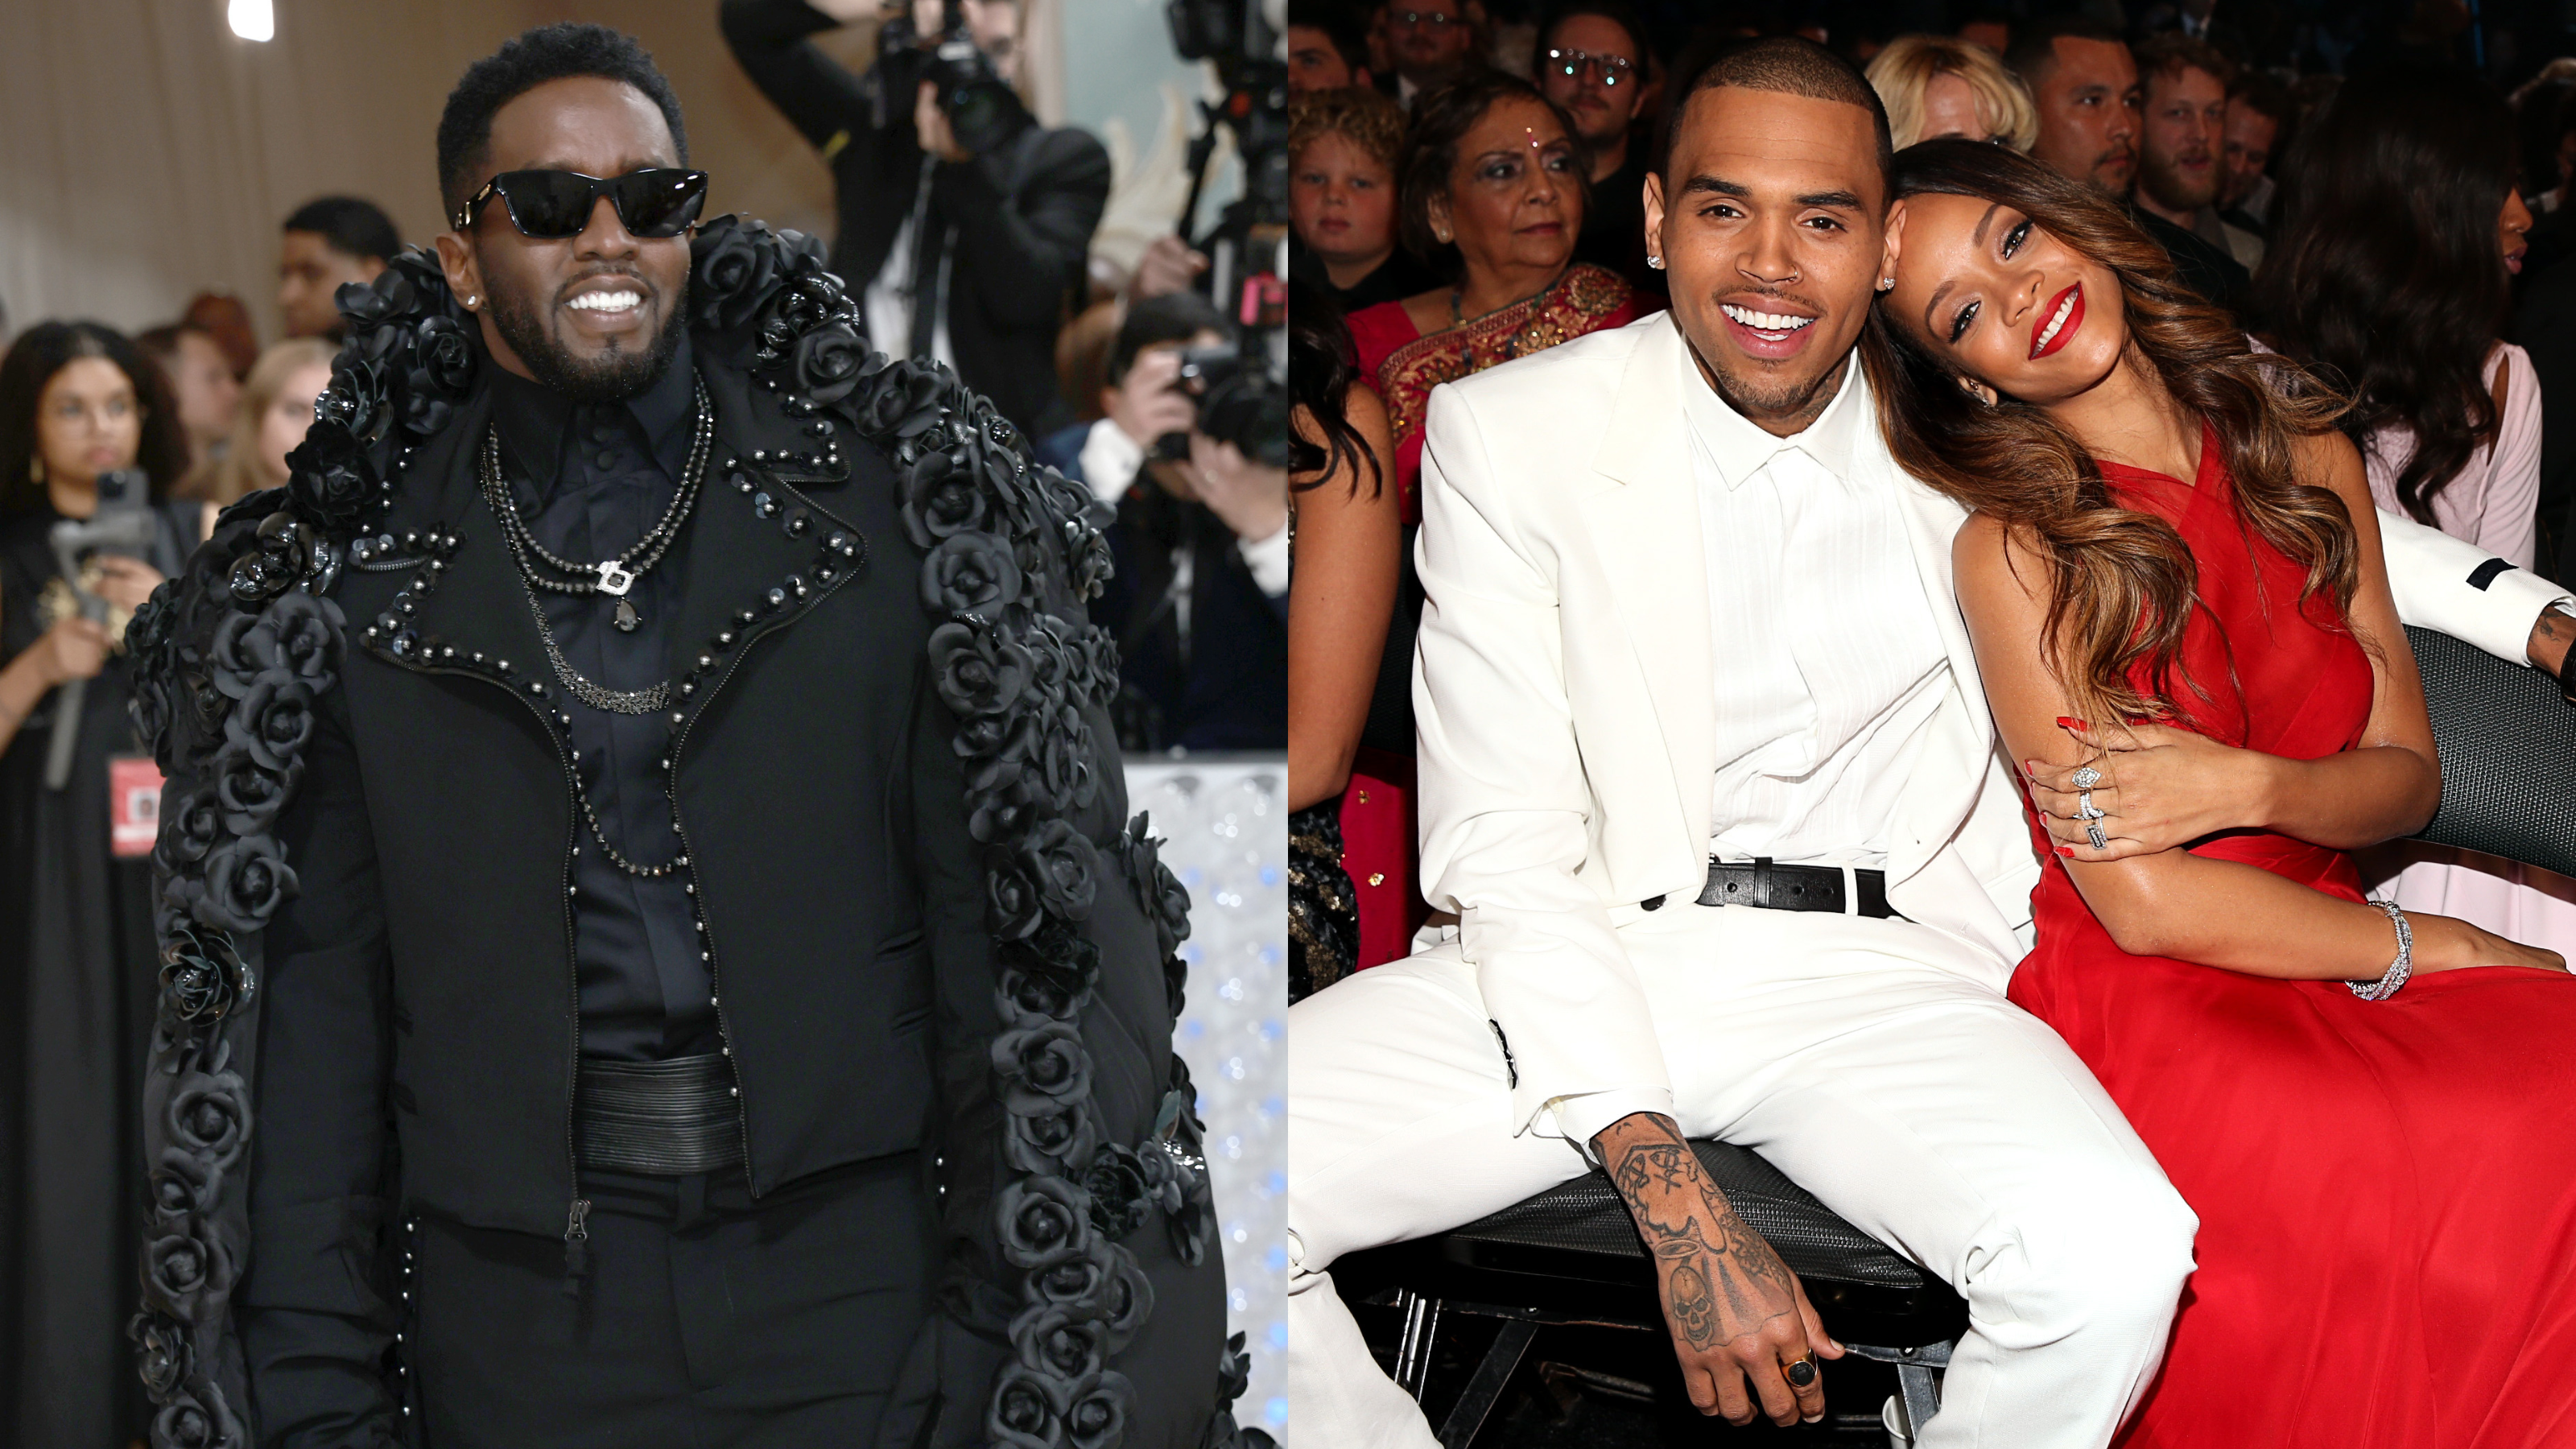 Diddy’s Remarks On Chris Brown Assaulting Rihanna Resurface: “Relationships Get Ugly”